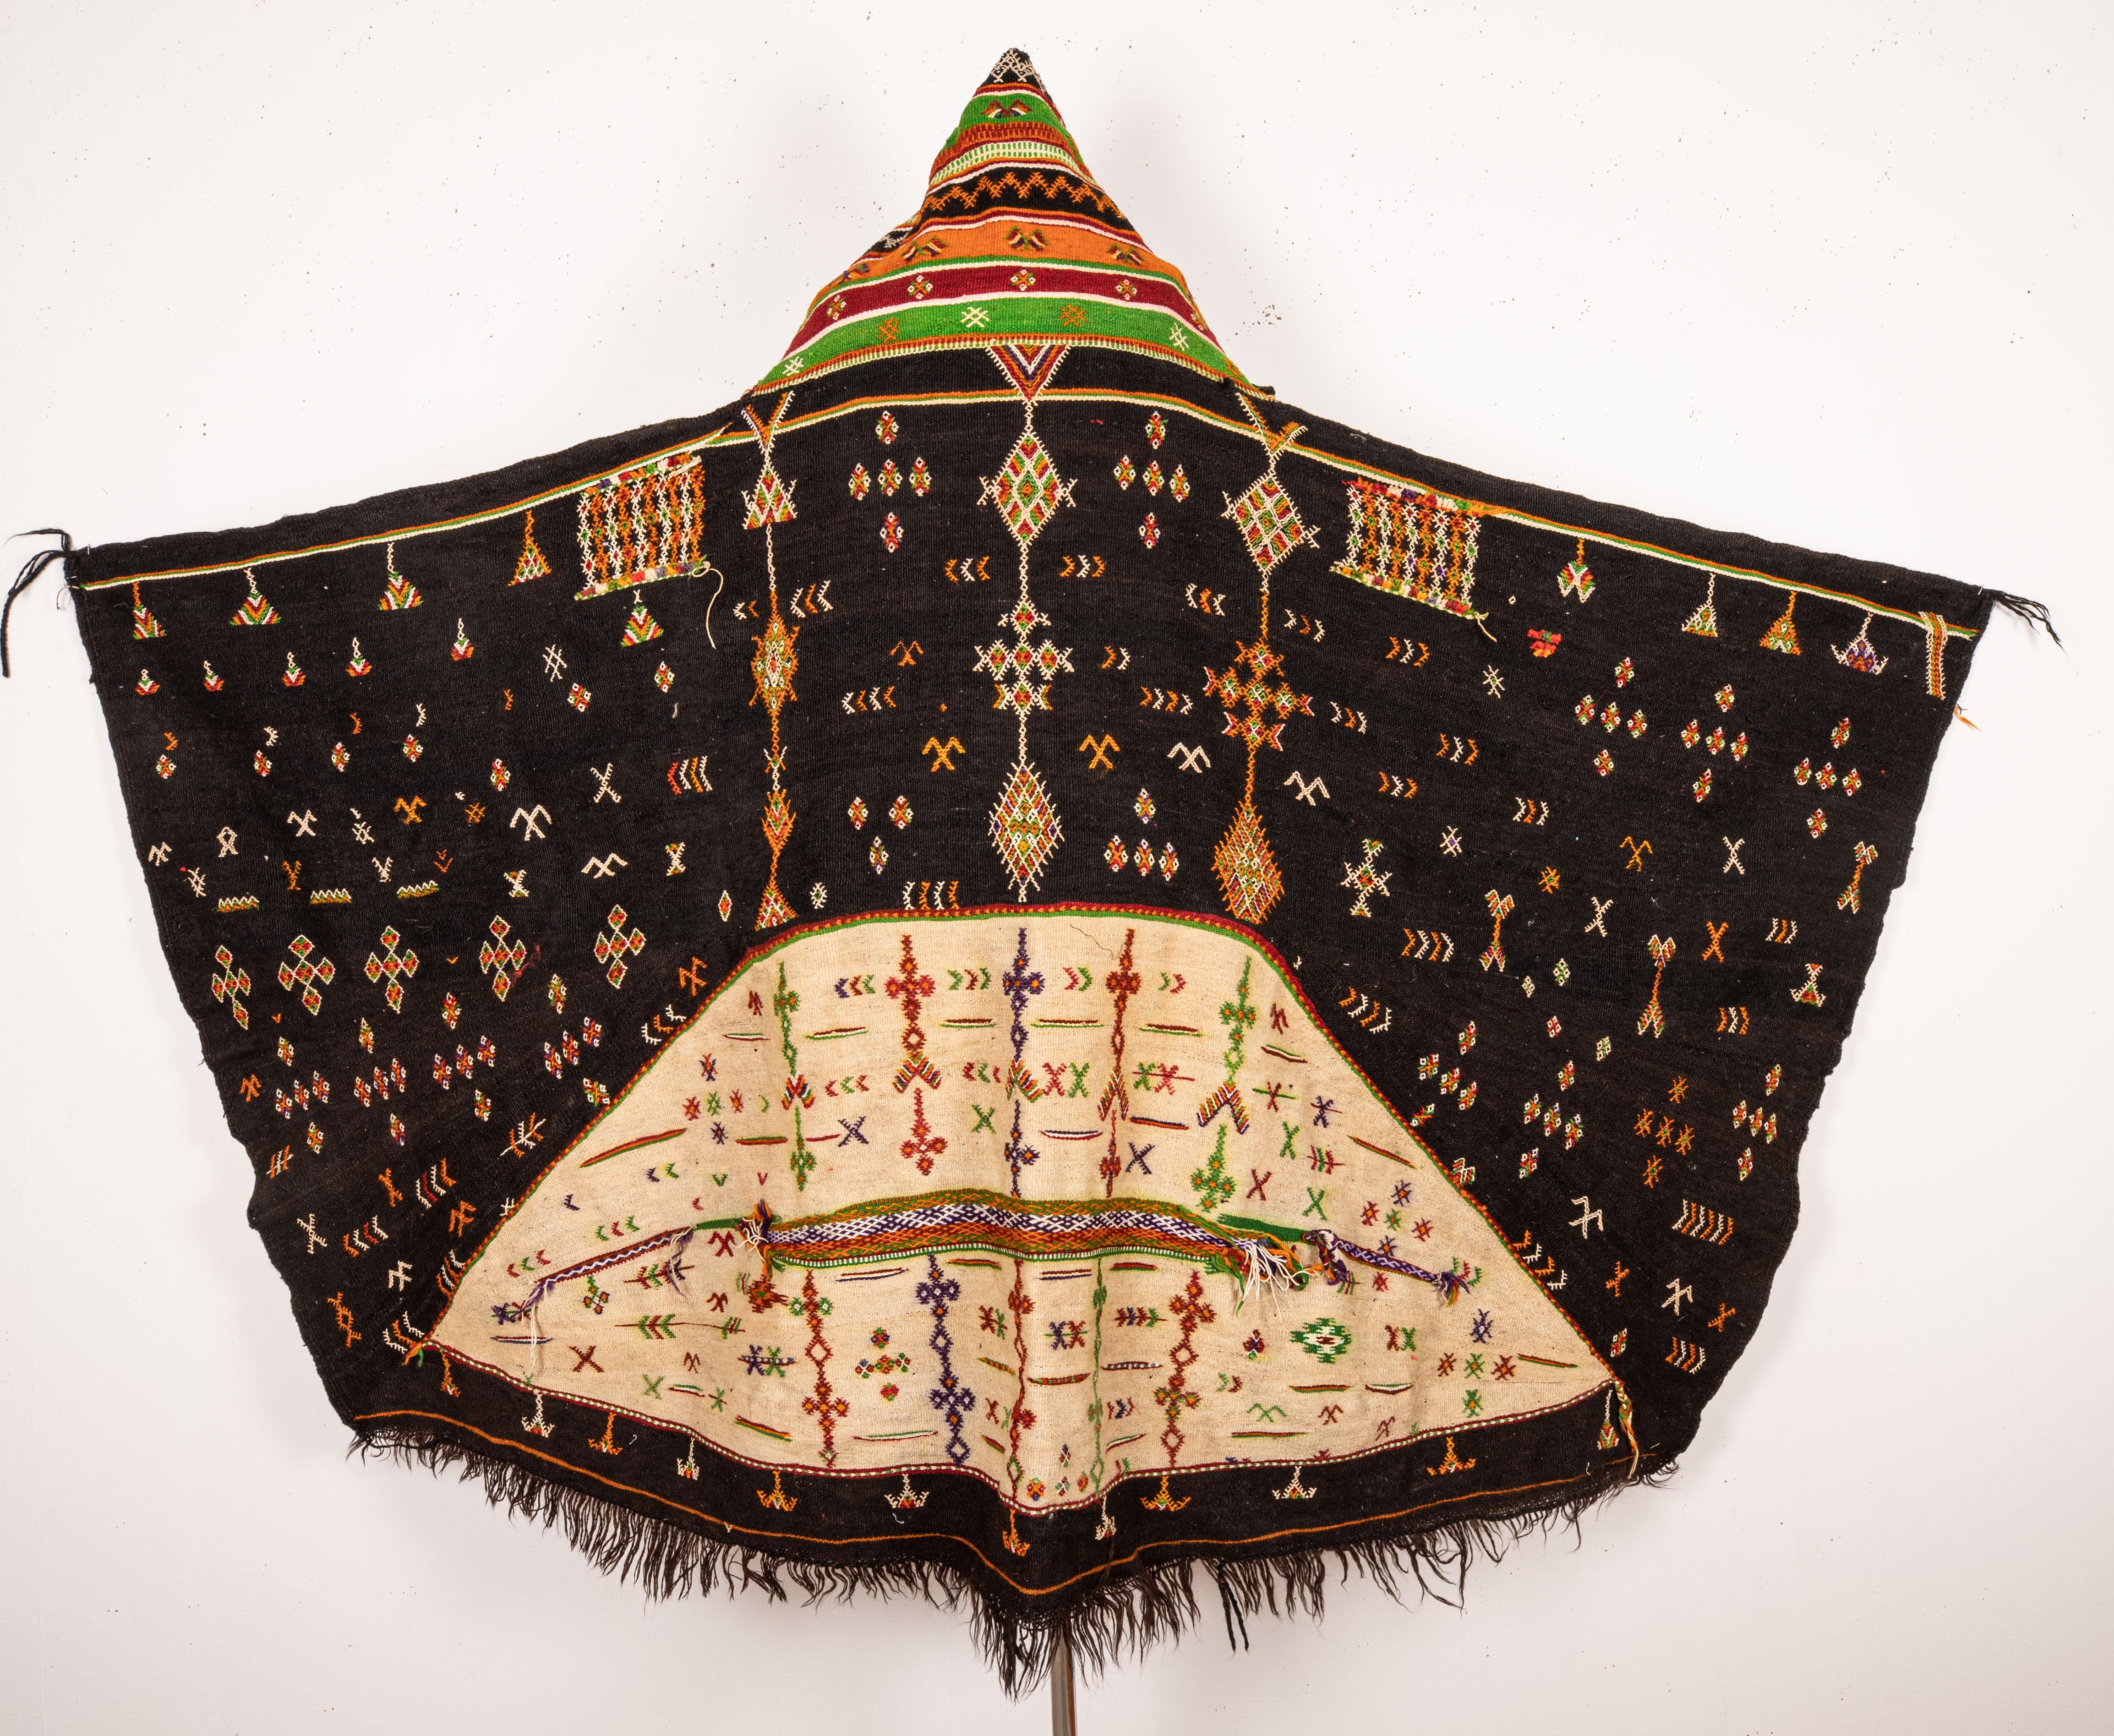 This is a hand woven wool cape called 'akin' from Morocco, from 1960s or earlier and it is unusual with its color arrangements.